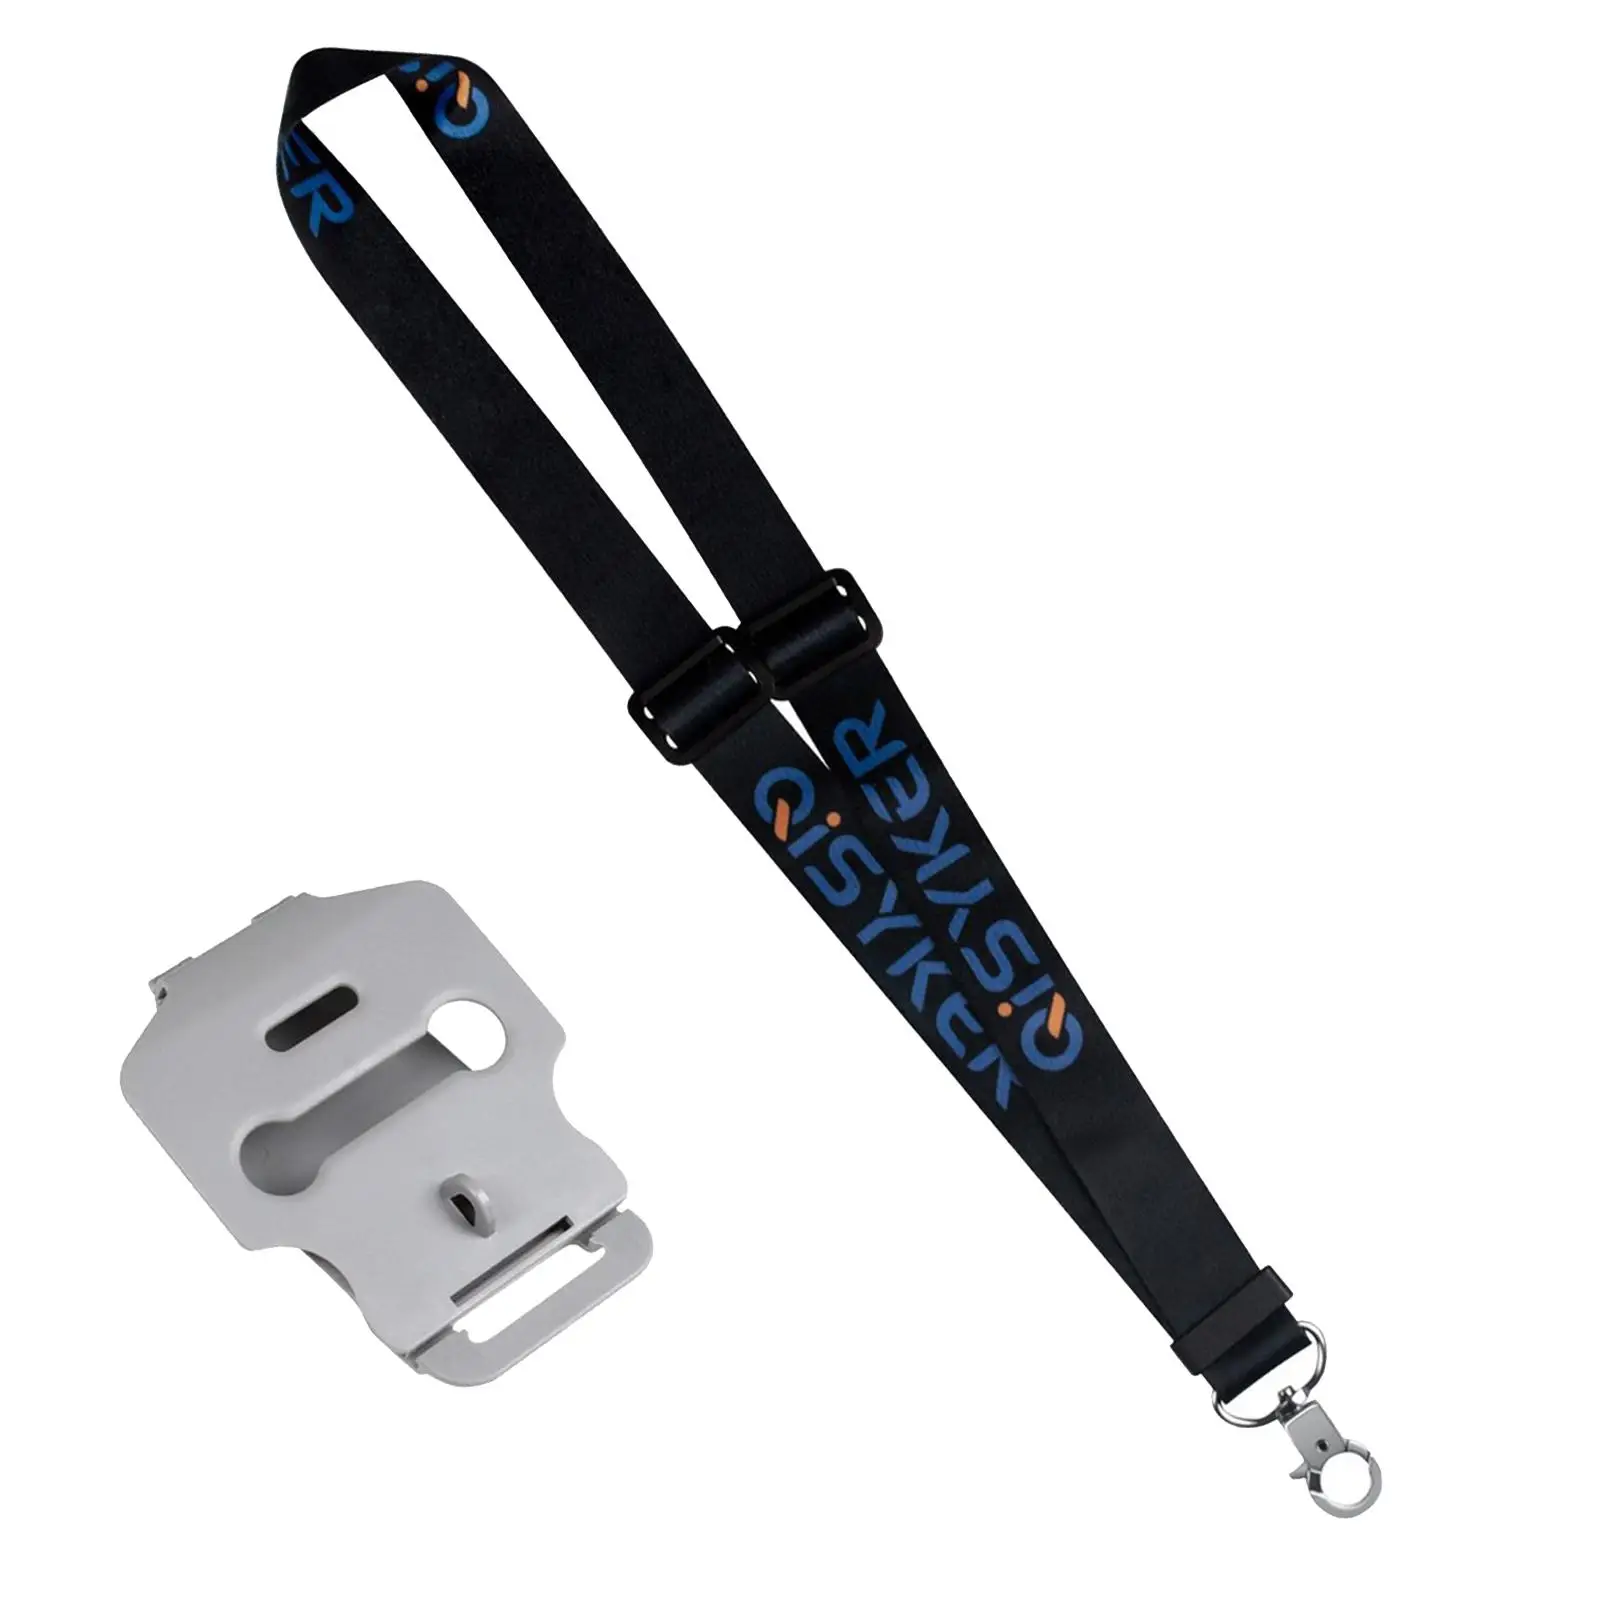 Smart Remote Control Lanyard with Bracket 36cm~63.5cm Release Hands Adjustable Remote Neck Strap for Quadcopter Accessories